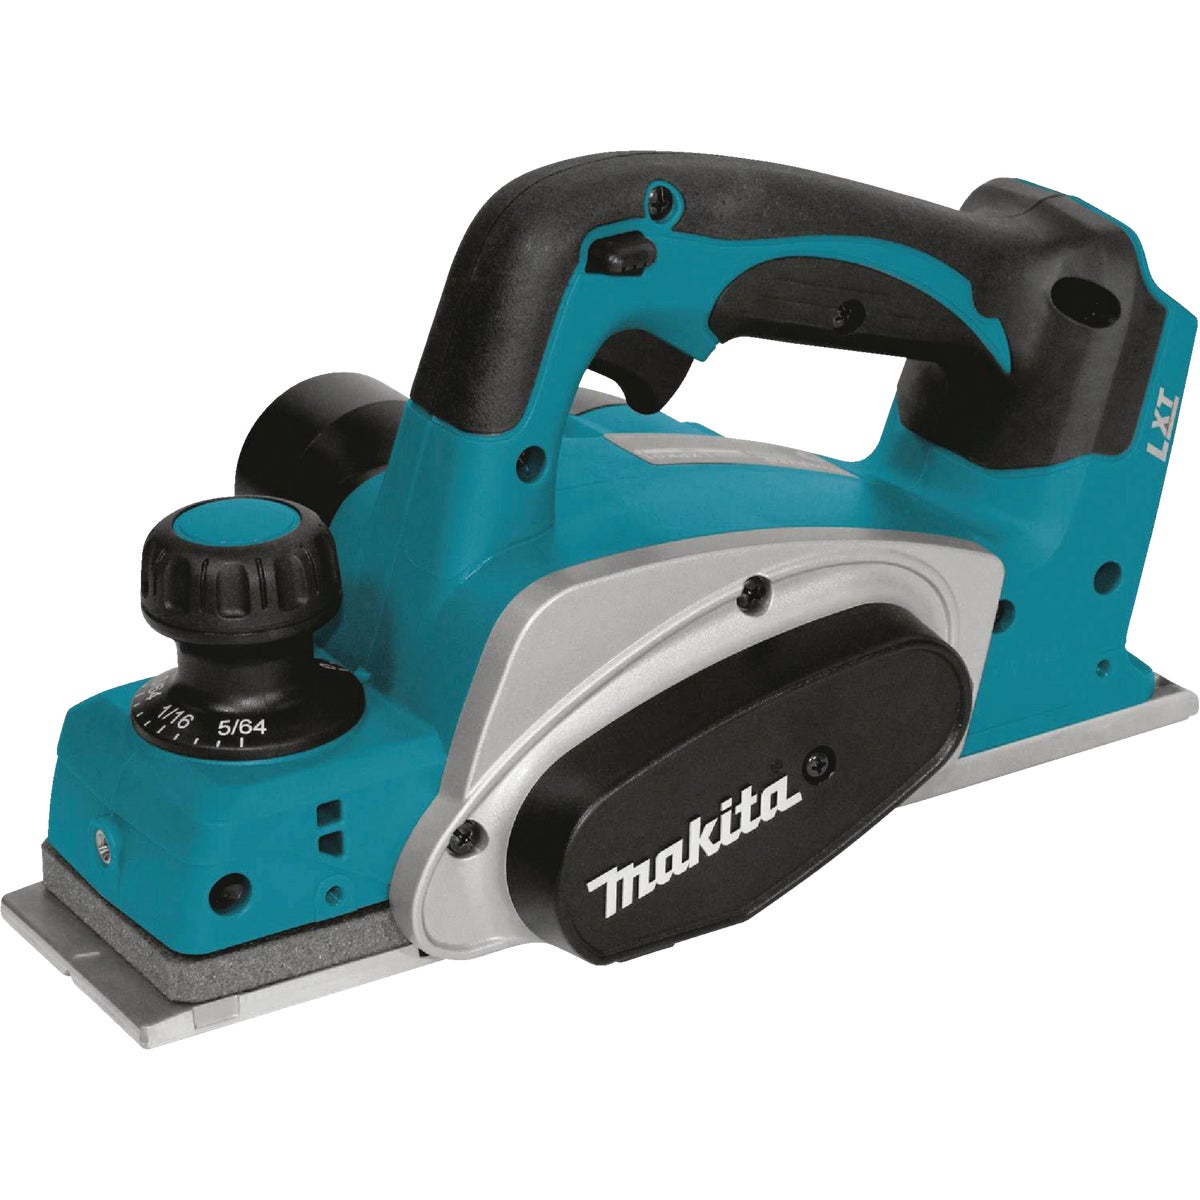 Makita 18V LXT 18 Volt Lithium-Ion 3-1/4 In. Cordless Planer (Tool Only)